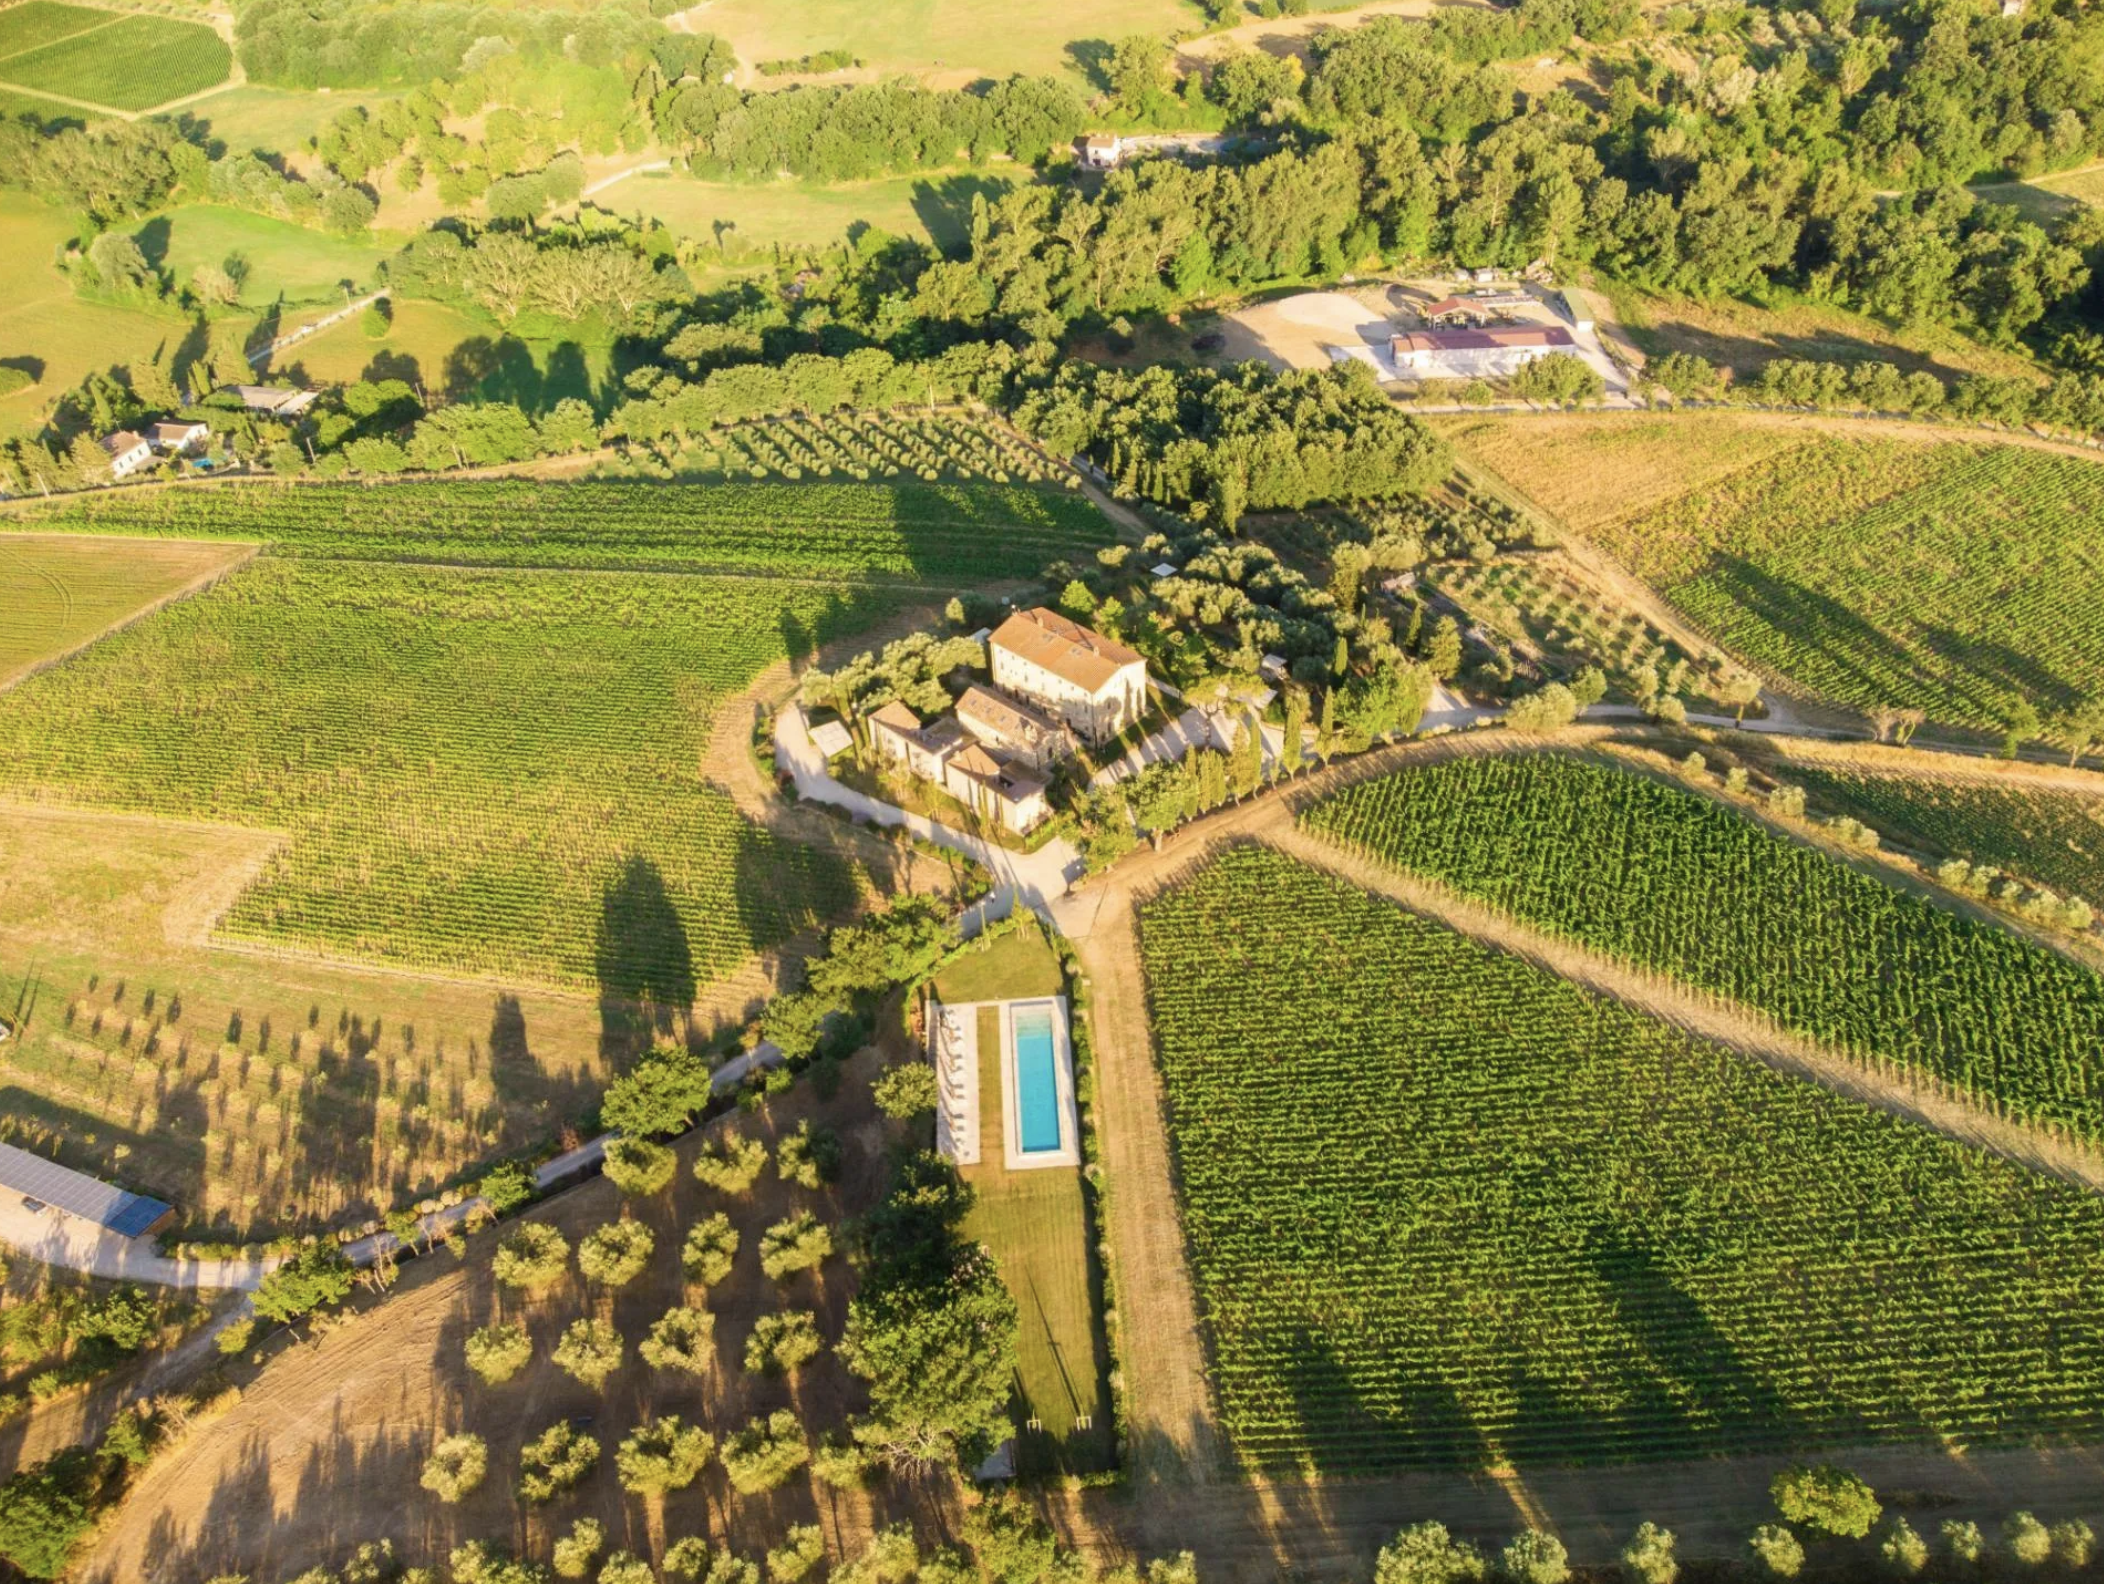 Francis York Villa Travertino: Luxury Villa and Wine Estate in the Heart of Tuscany 14.png